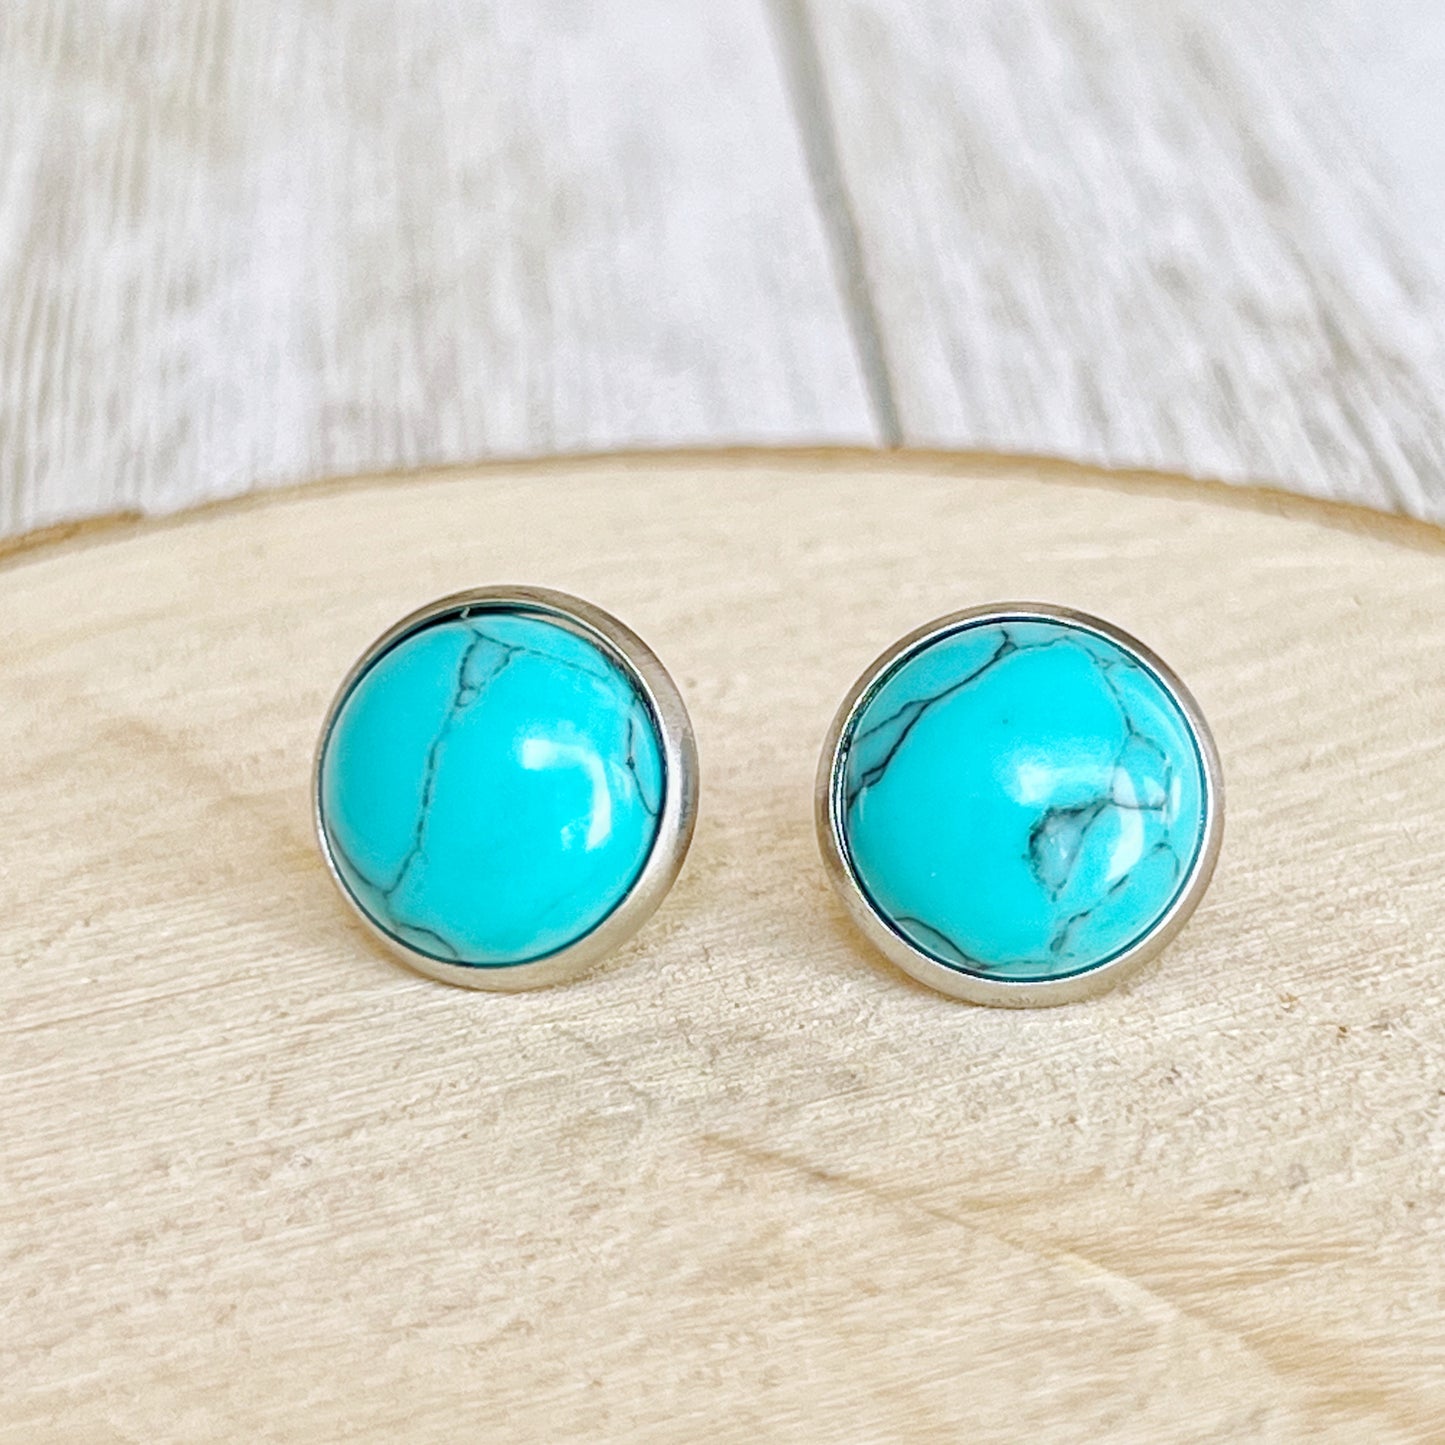 Turquoise 12mm Silver Stud Earrings: Boho Western Chic Accessories